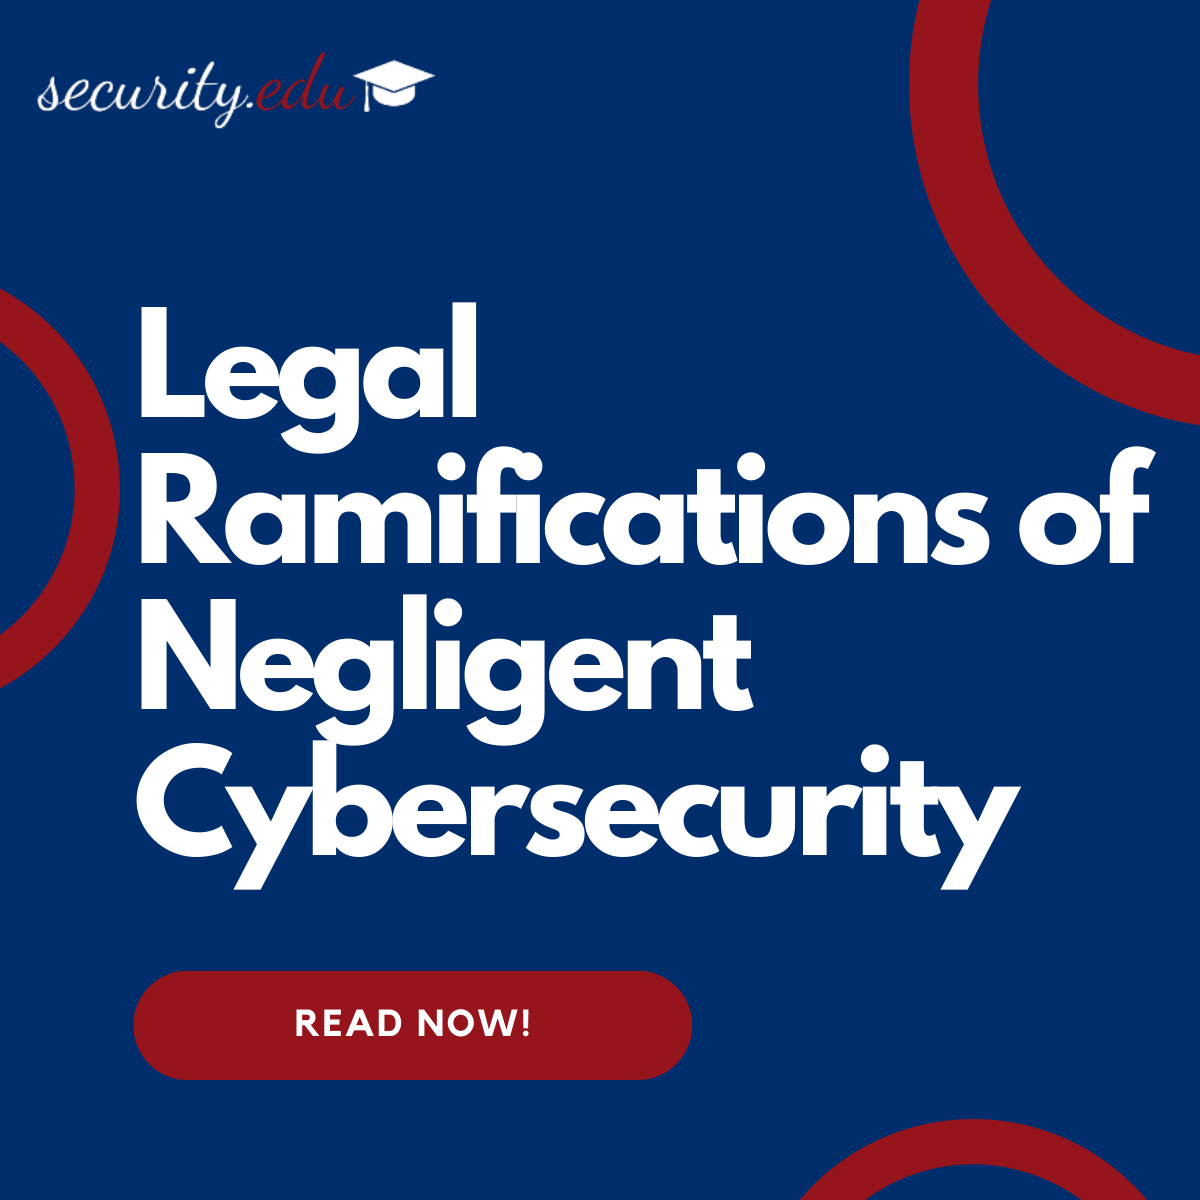 Legal Ramifications of Negligent Cybersecurity in Schools and Unis